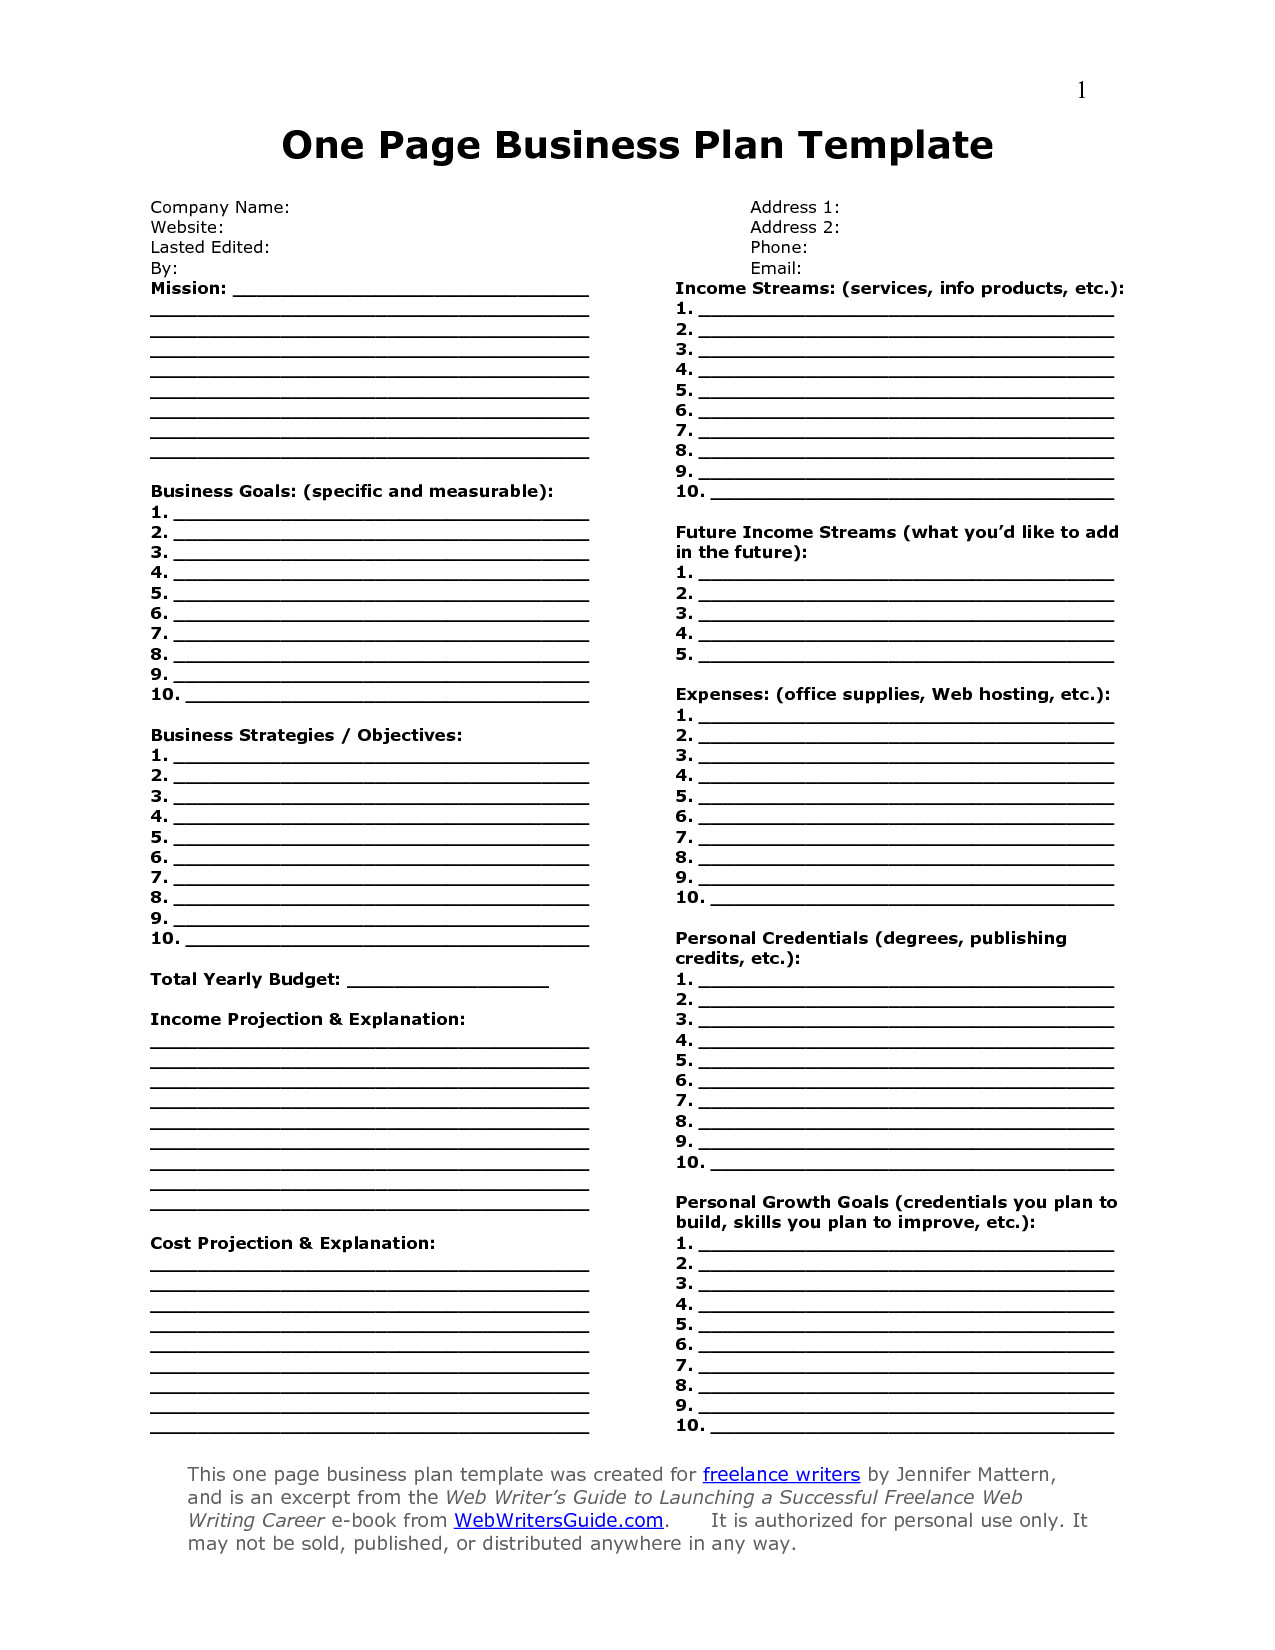 Business One Sheet Template E Page Business Plan Template